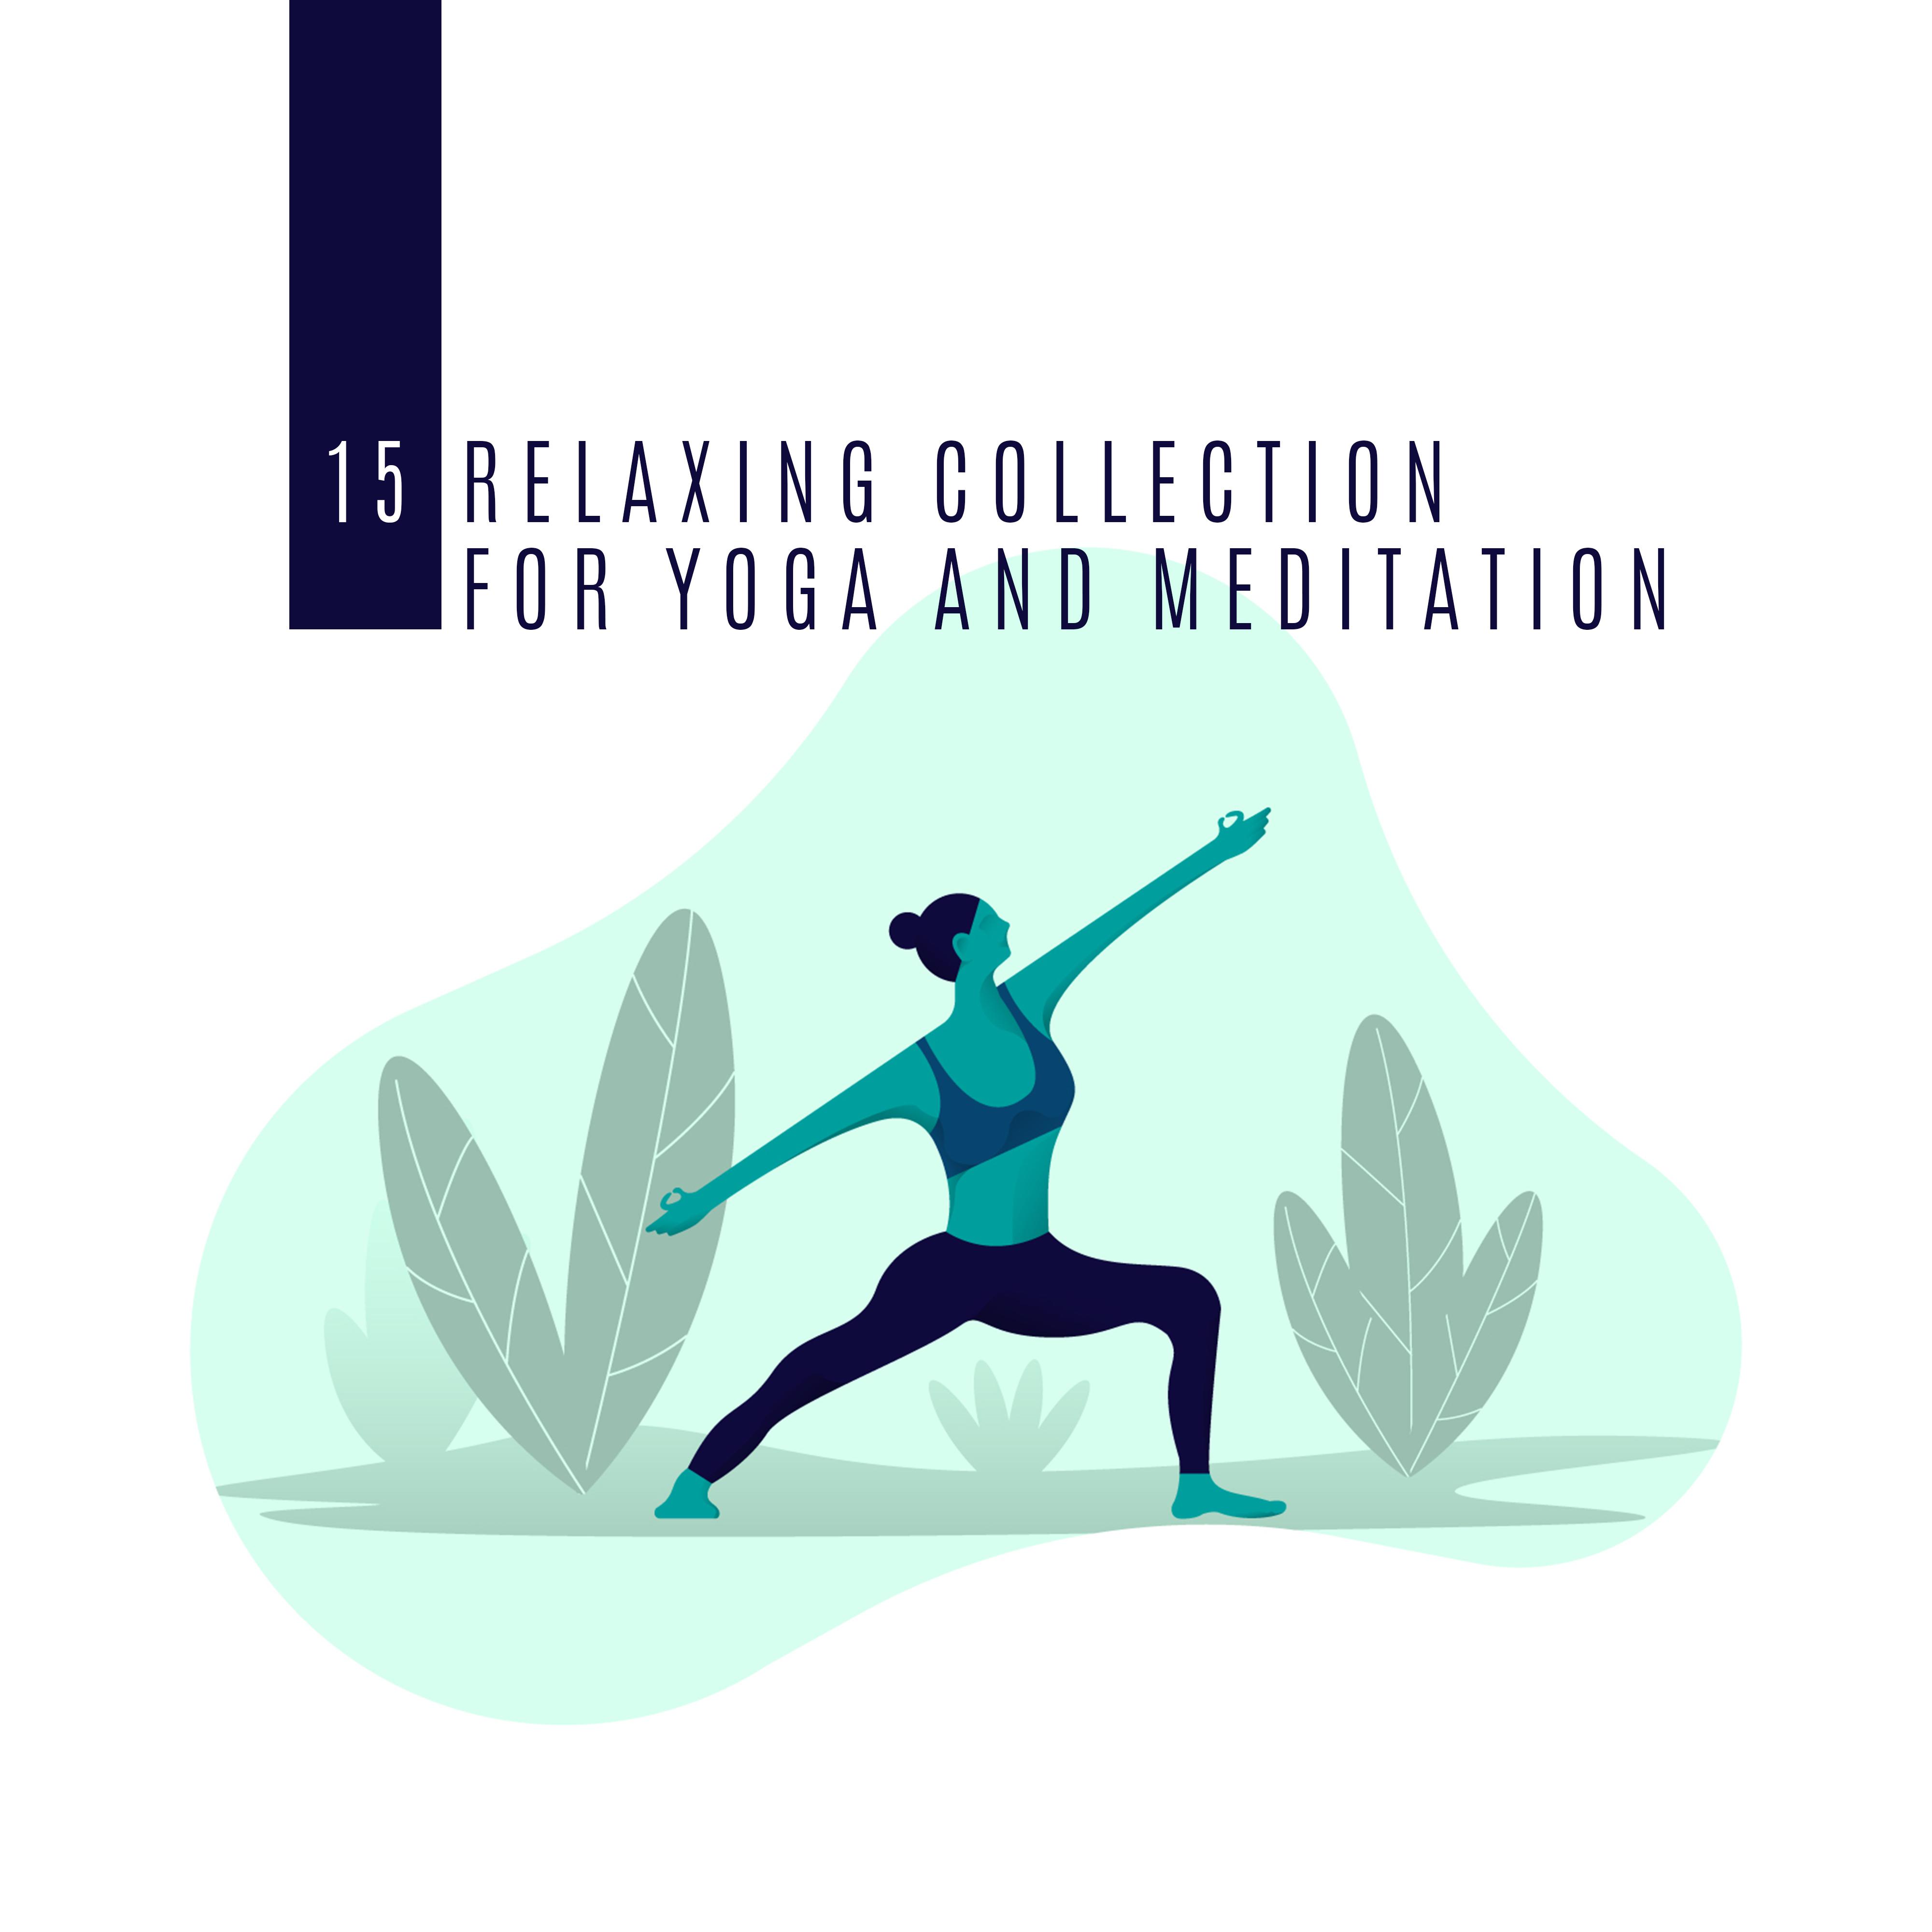 15 Relaxing Collection for Yoga and Meditation – Yoga Training, Meditation Music Zone, Zen Yoga, Pure Mind, Yoga Relaxing Music, Zen, Inner Balance